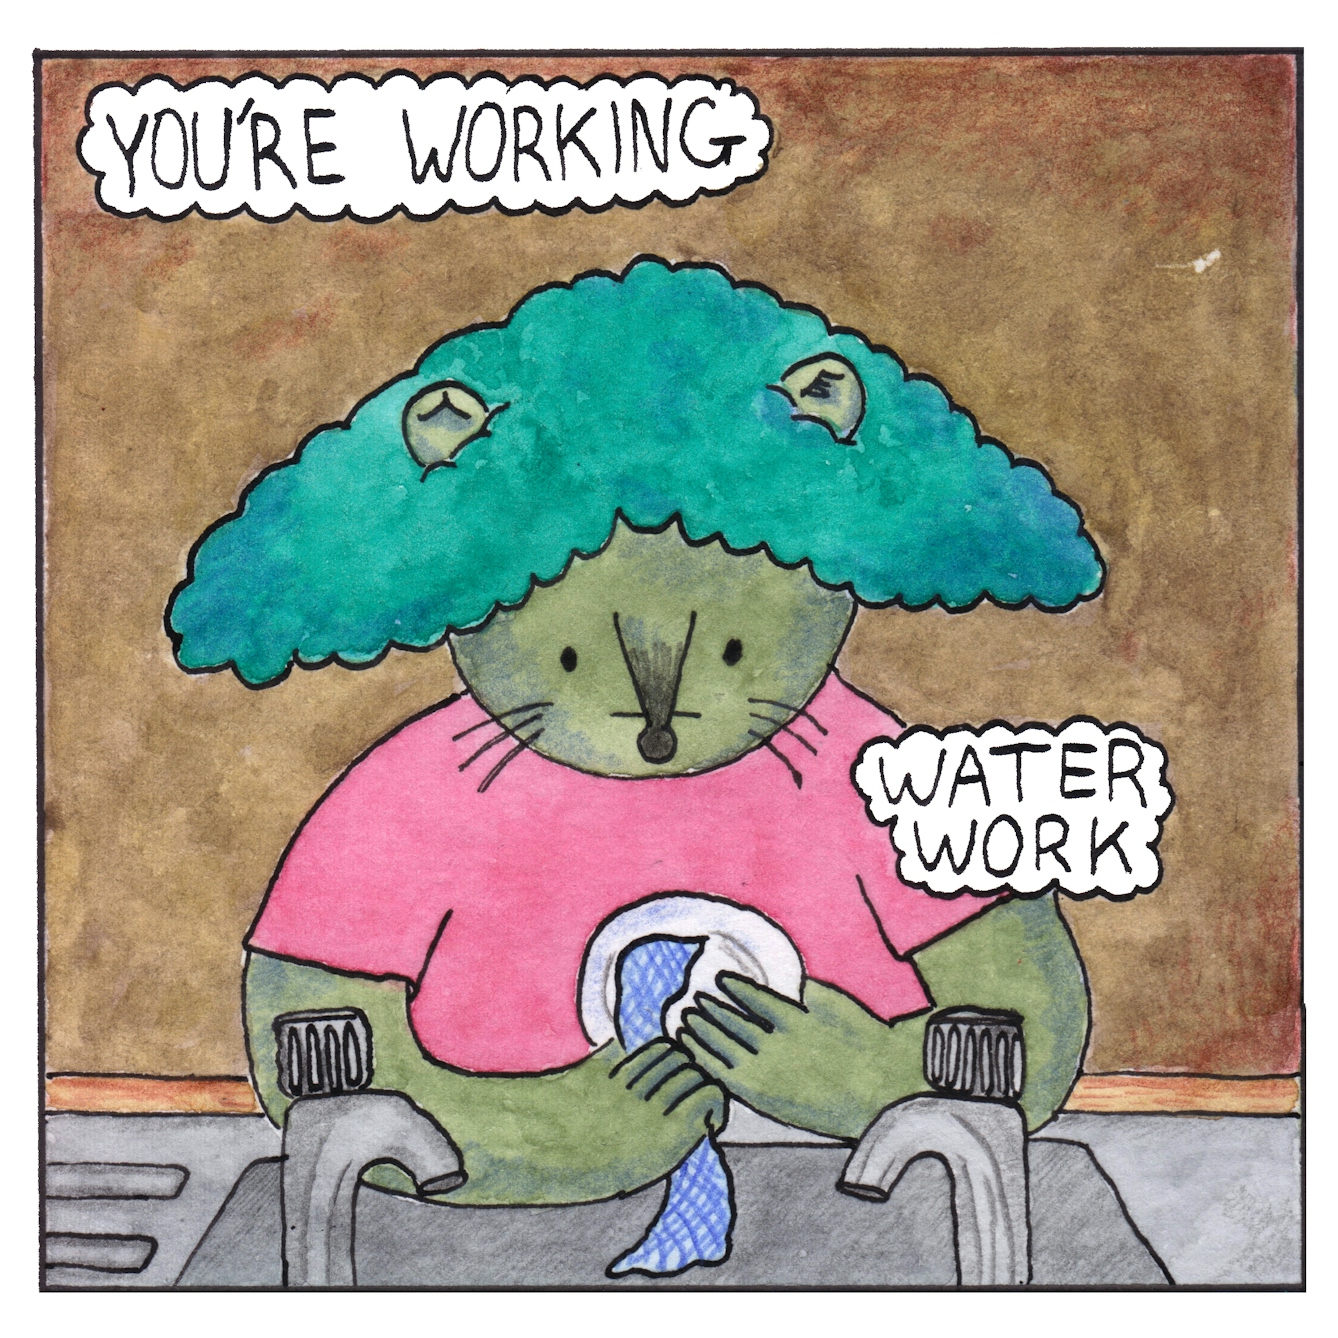 Panel 1 of a six-panel comic made with ink, watercolour and colour pencils: A green humanoid mouse with ears protruding from the top of a mop of curly teal coloured hair stands facing the viewer. They are  washing a plate over a sink with two taps in the foreground. Two text bubbles say: “You’re working. Water work”